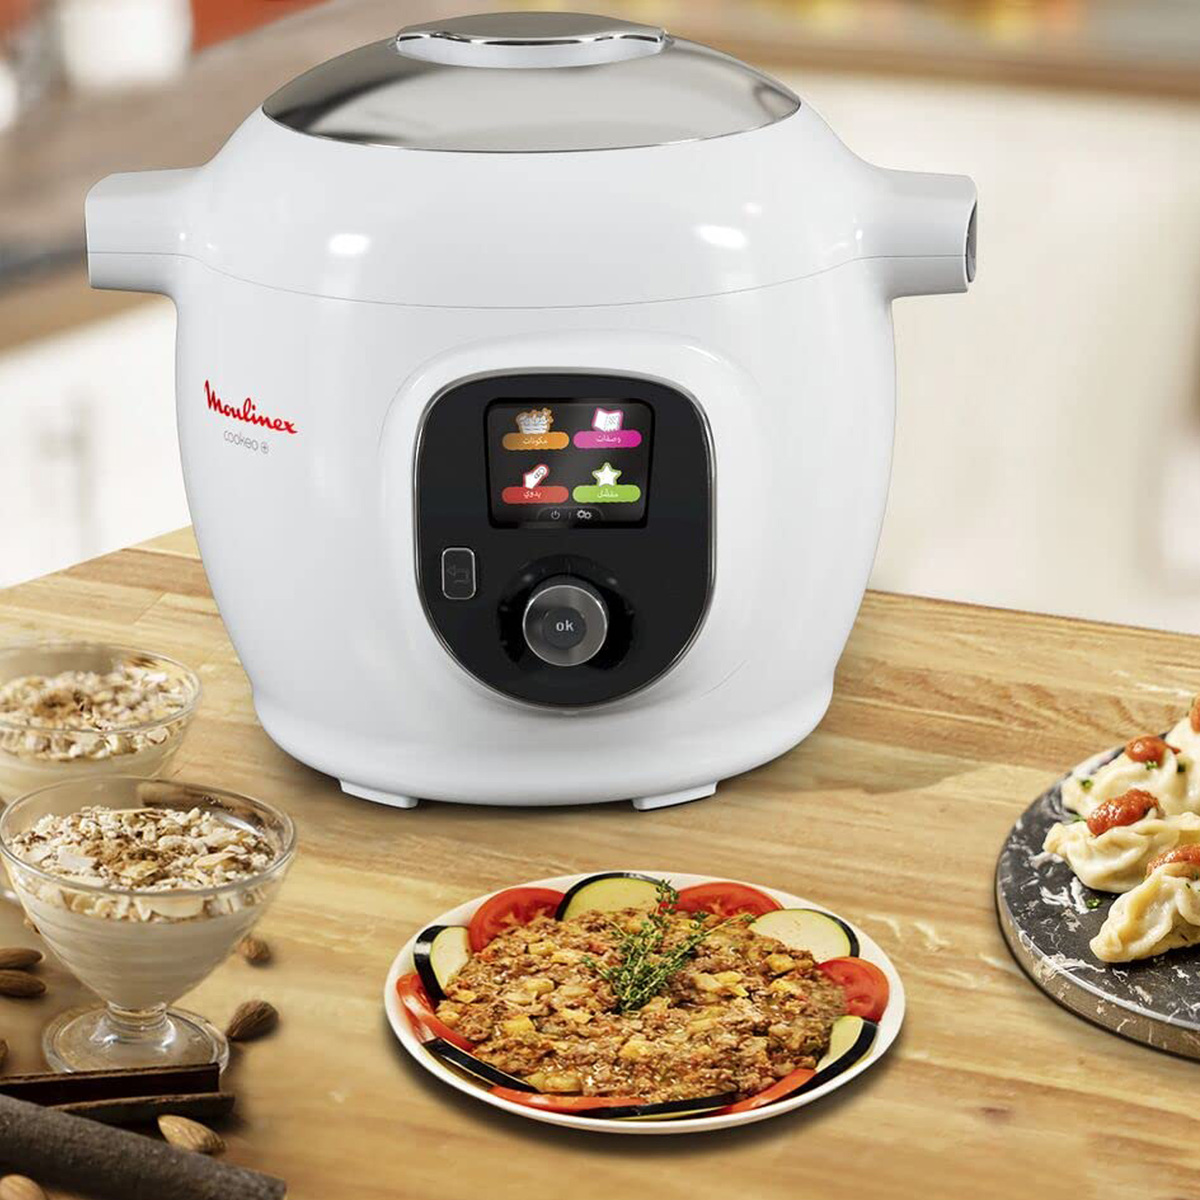 Moulinex Cookeo+ Multicooker, 6 L, White, CE851127E Online at Best Price, Multi Cookers